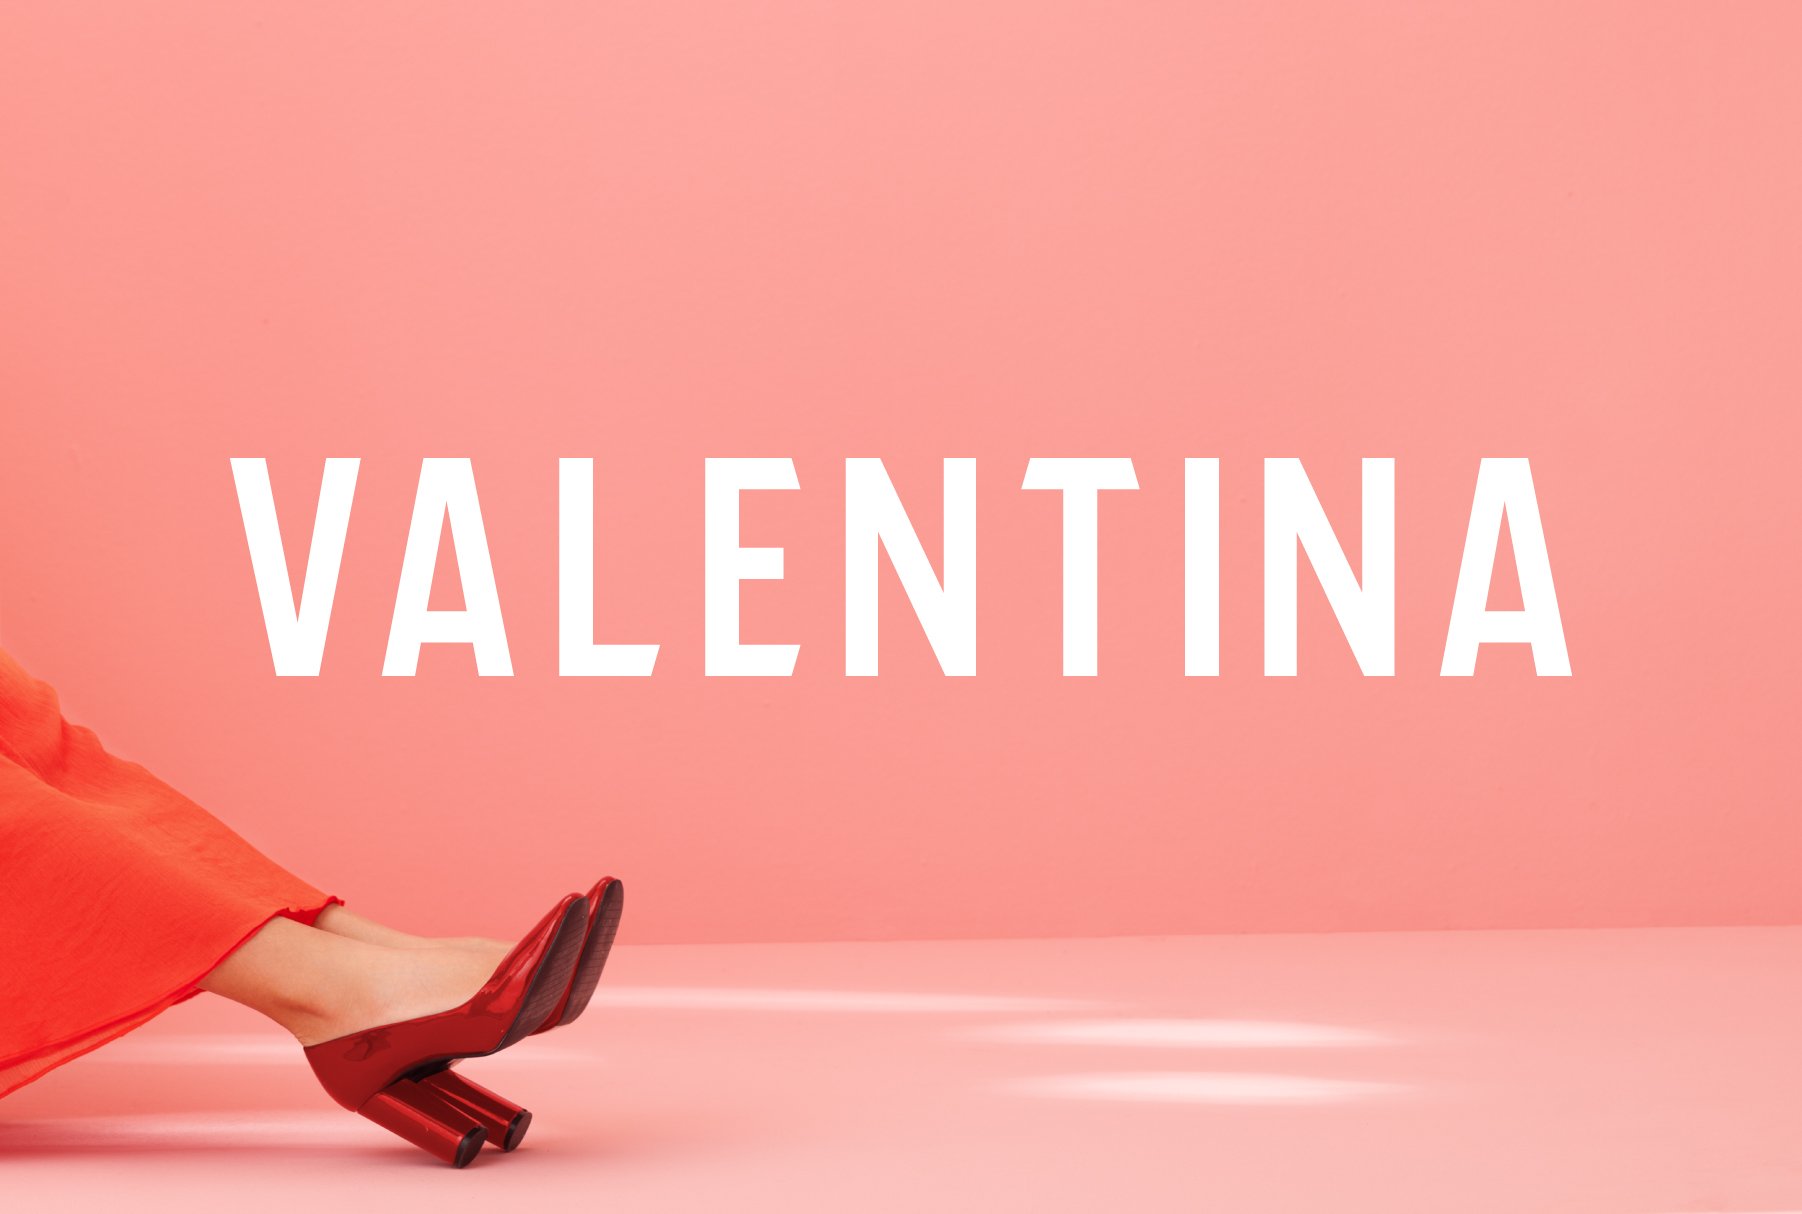 VALENTINA - Androgynous Display Font cover image.